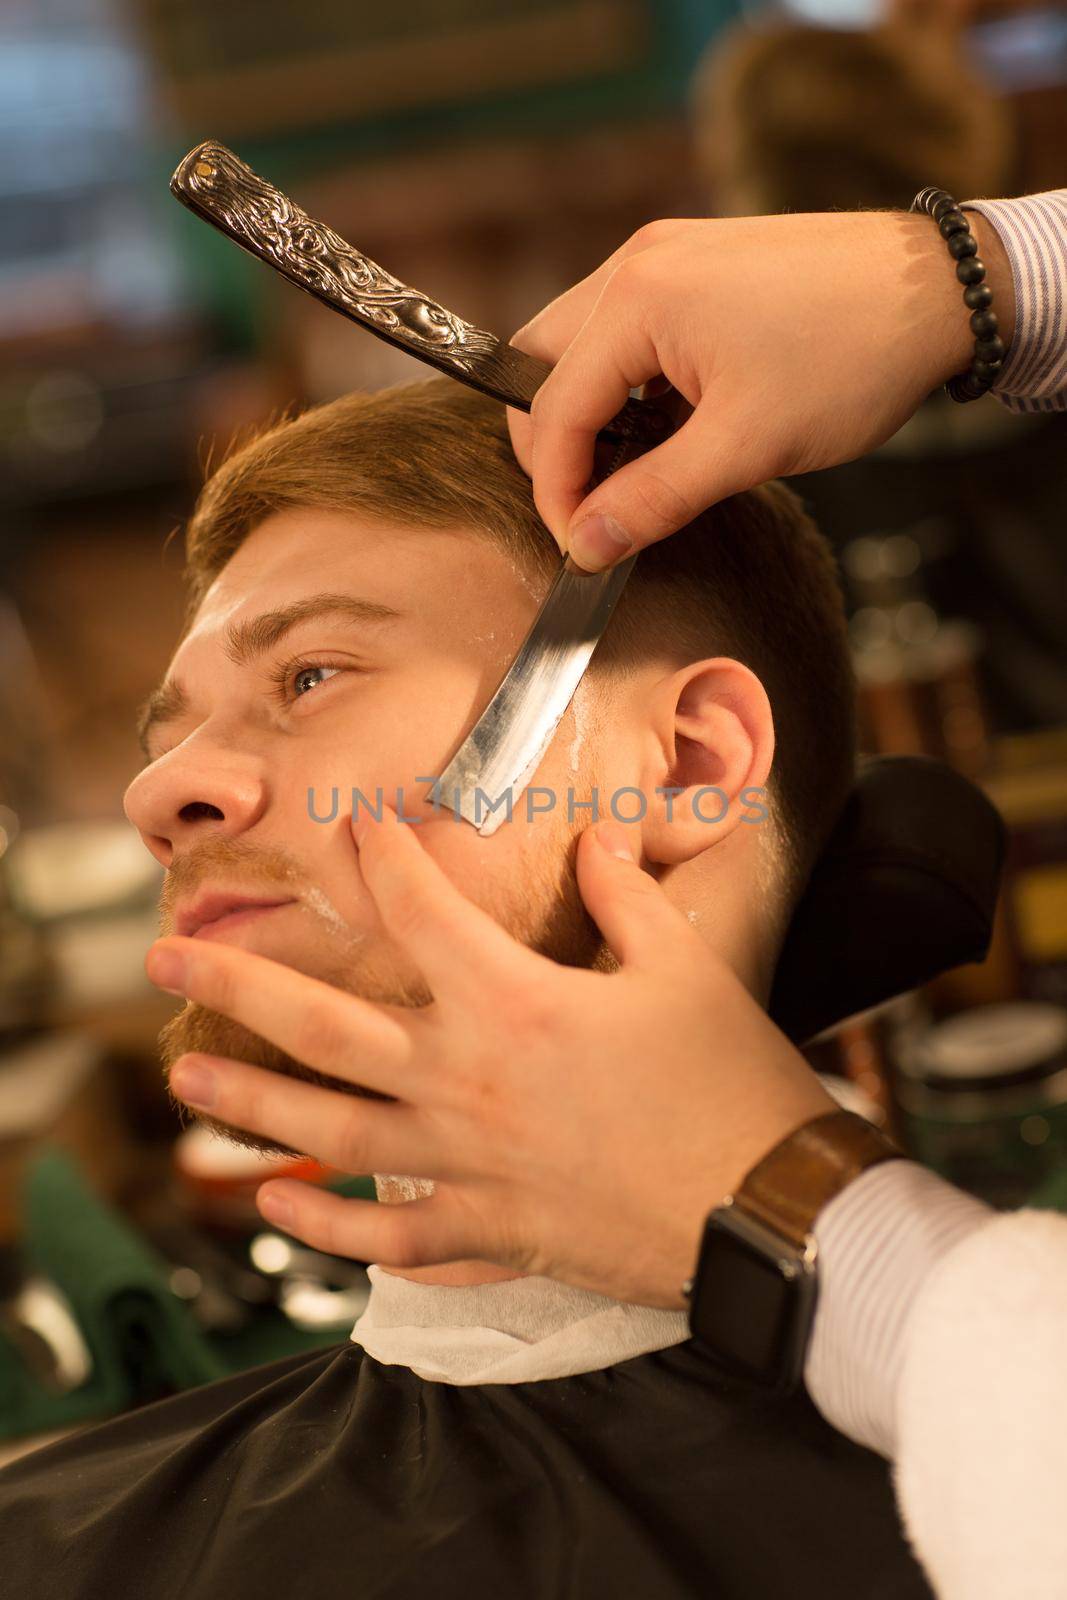 Vertical cropped close up of a young bearded man getting his beard shaved by a professional barber using razor barbering barbershop service lifestyle hipster classic traditional retro blade vintage.